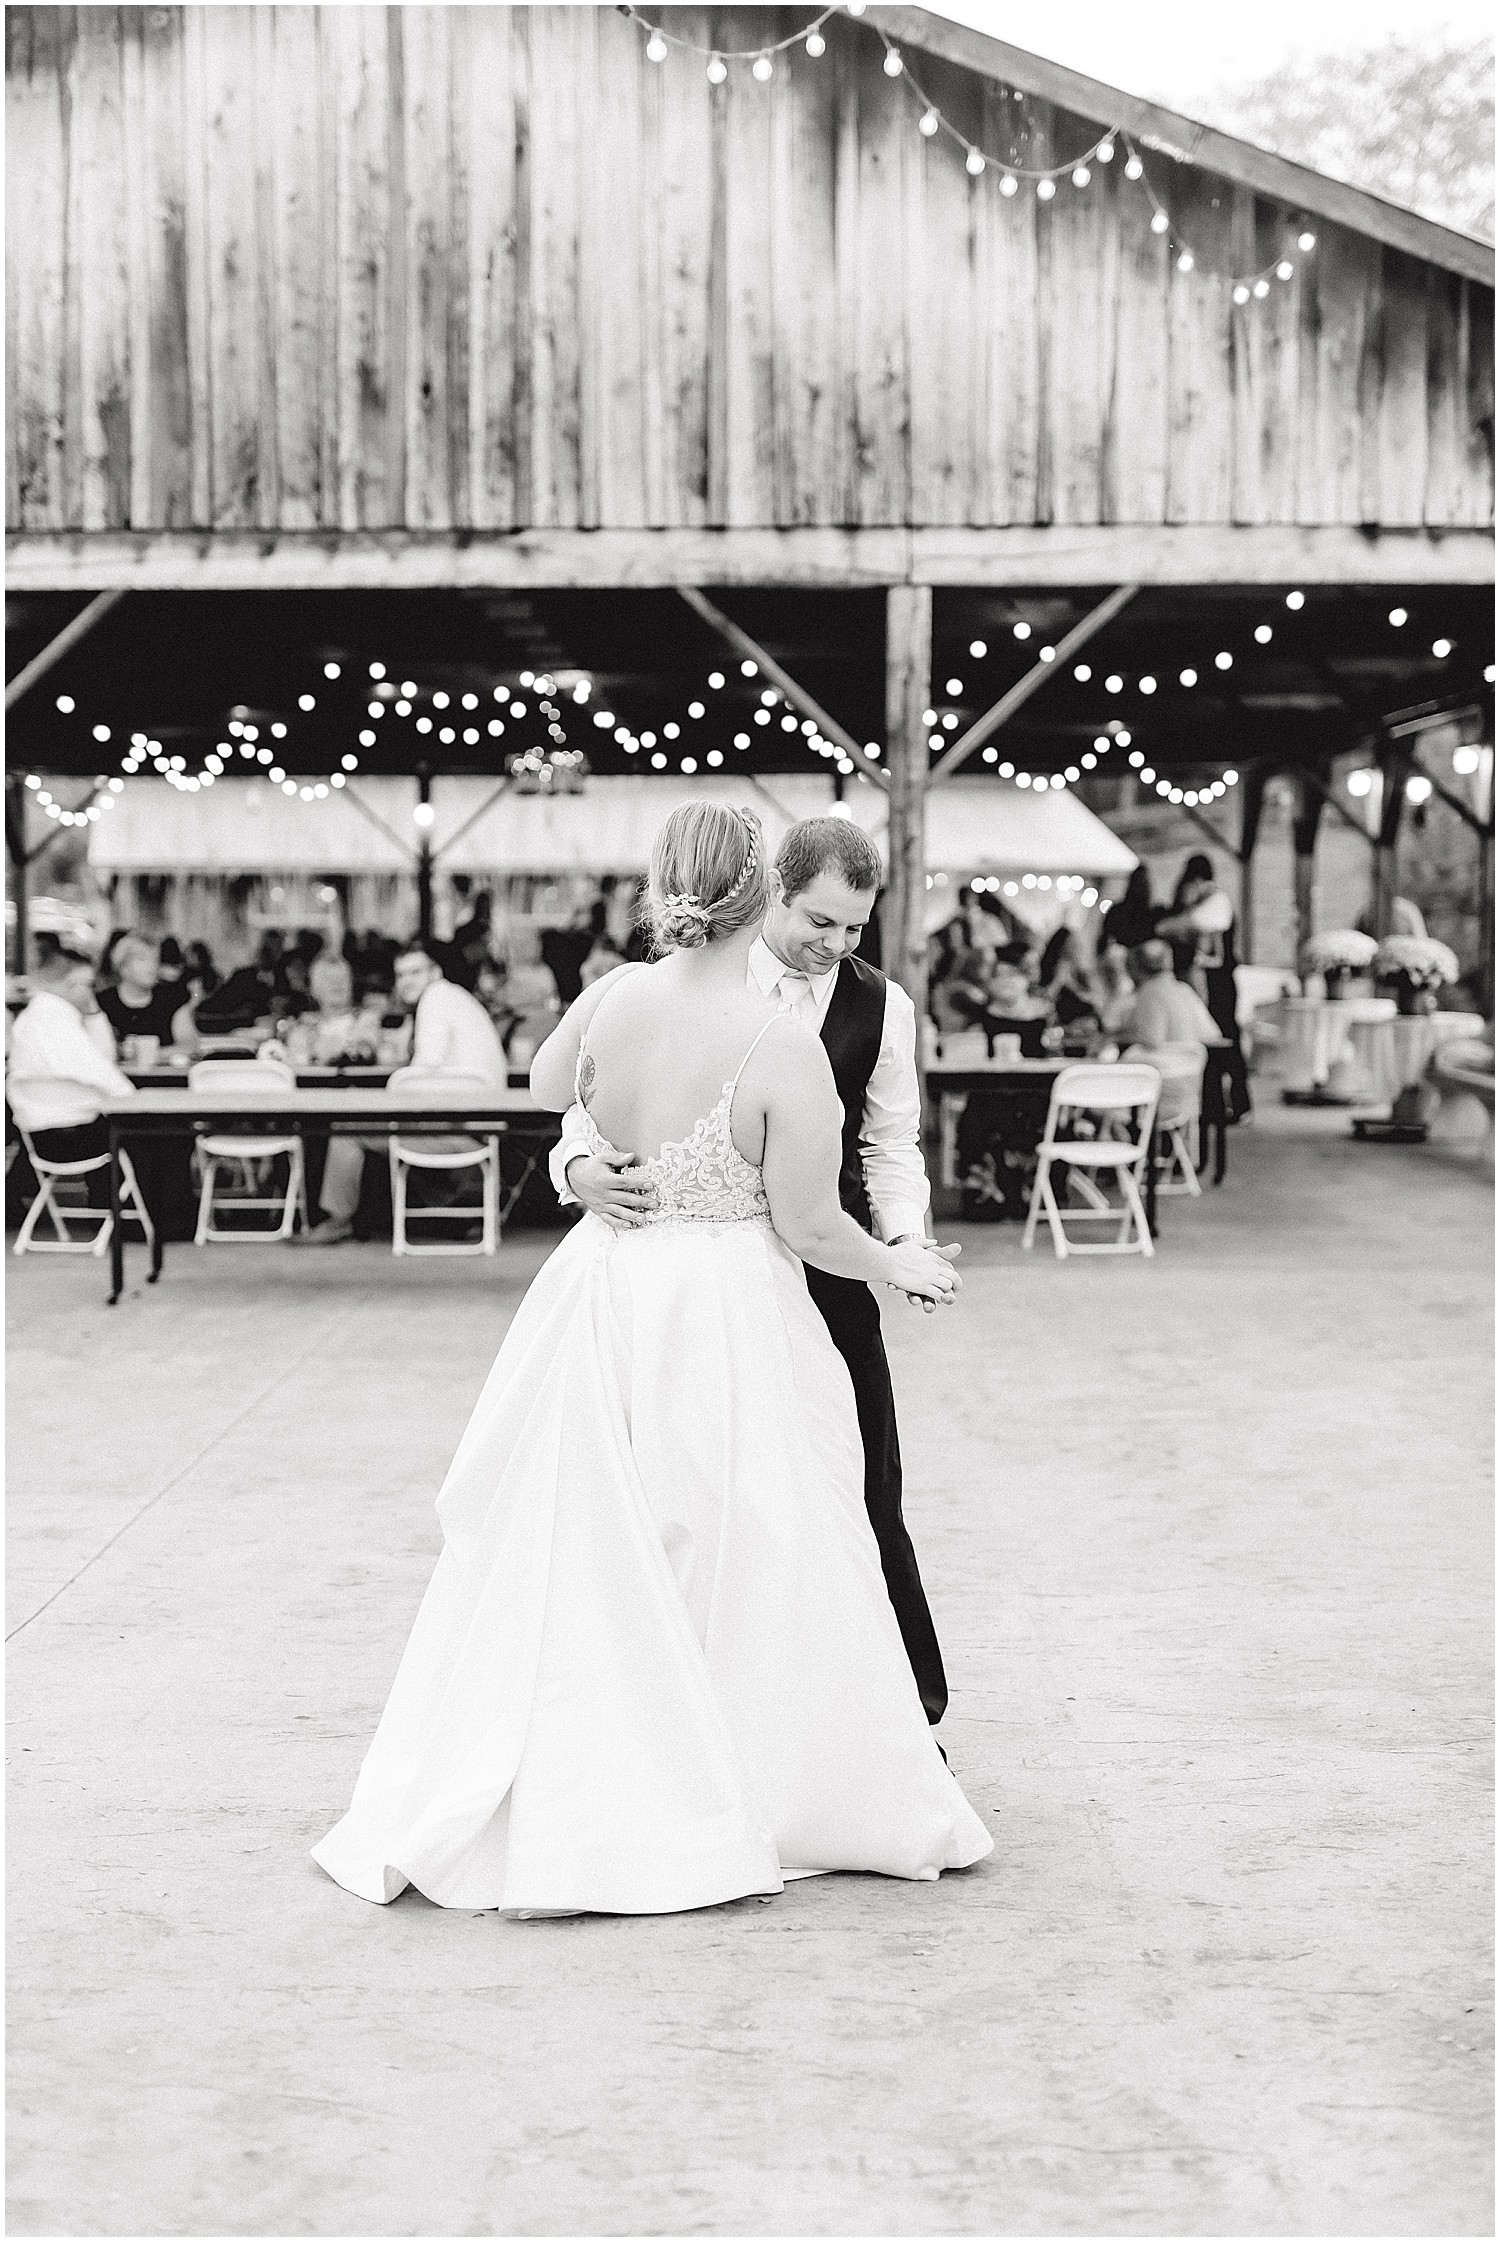 black and white image of bride and groom first dance under string lights on patio at kempker's back 40 wedding